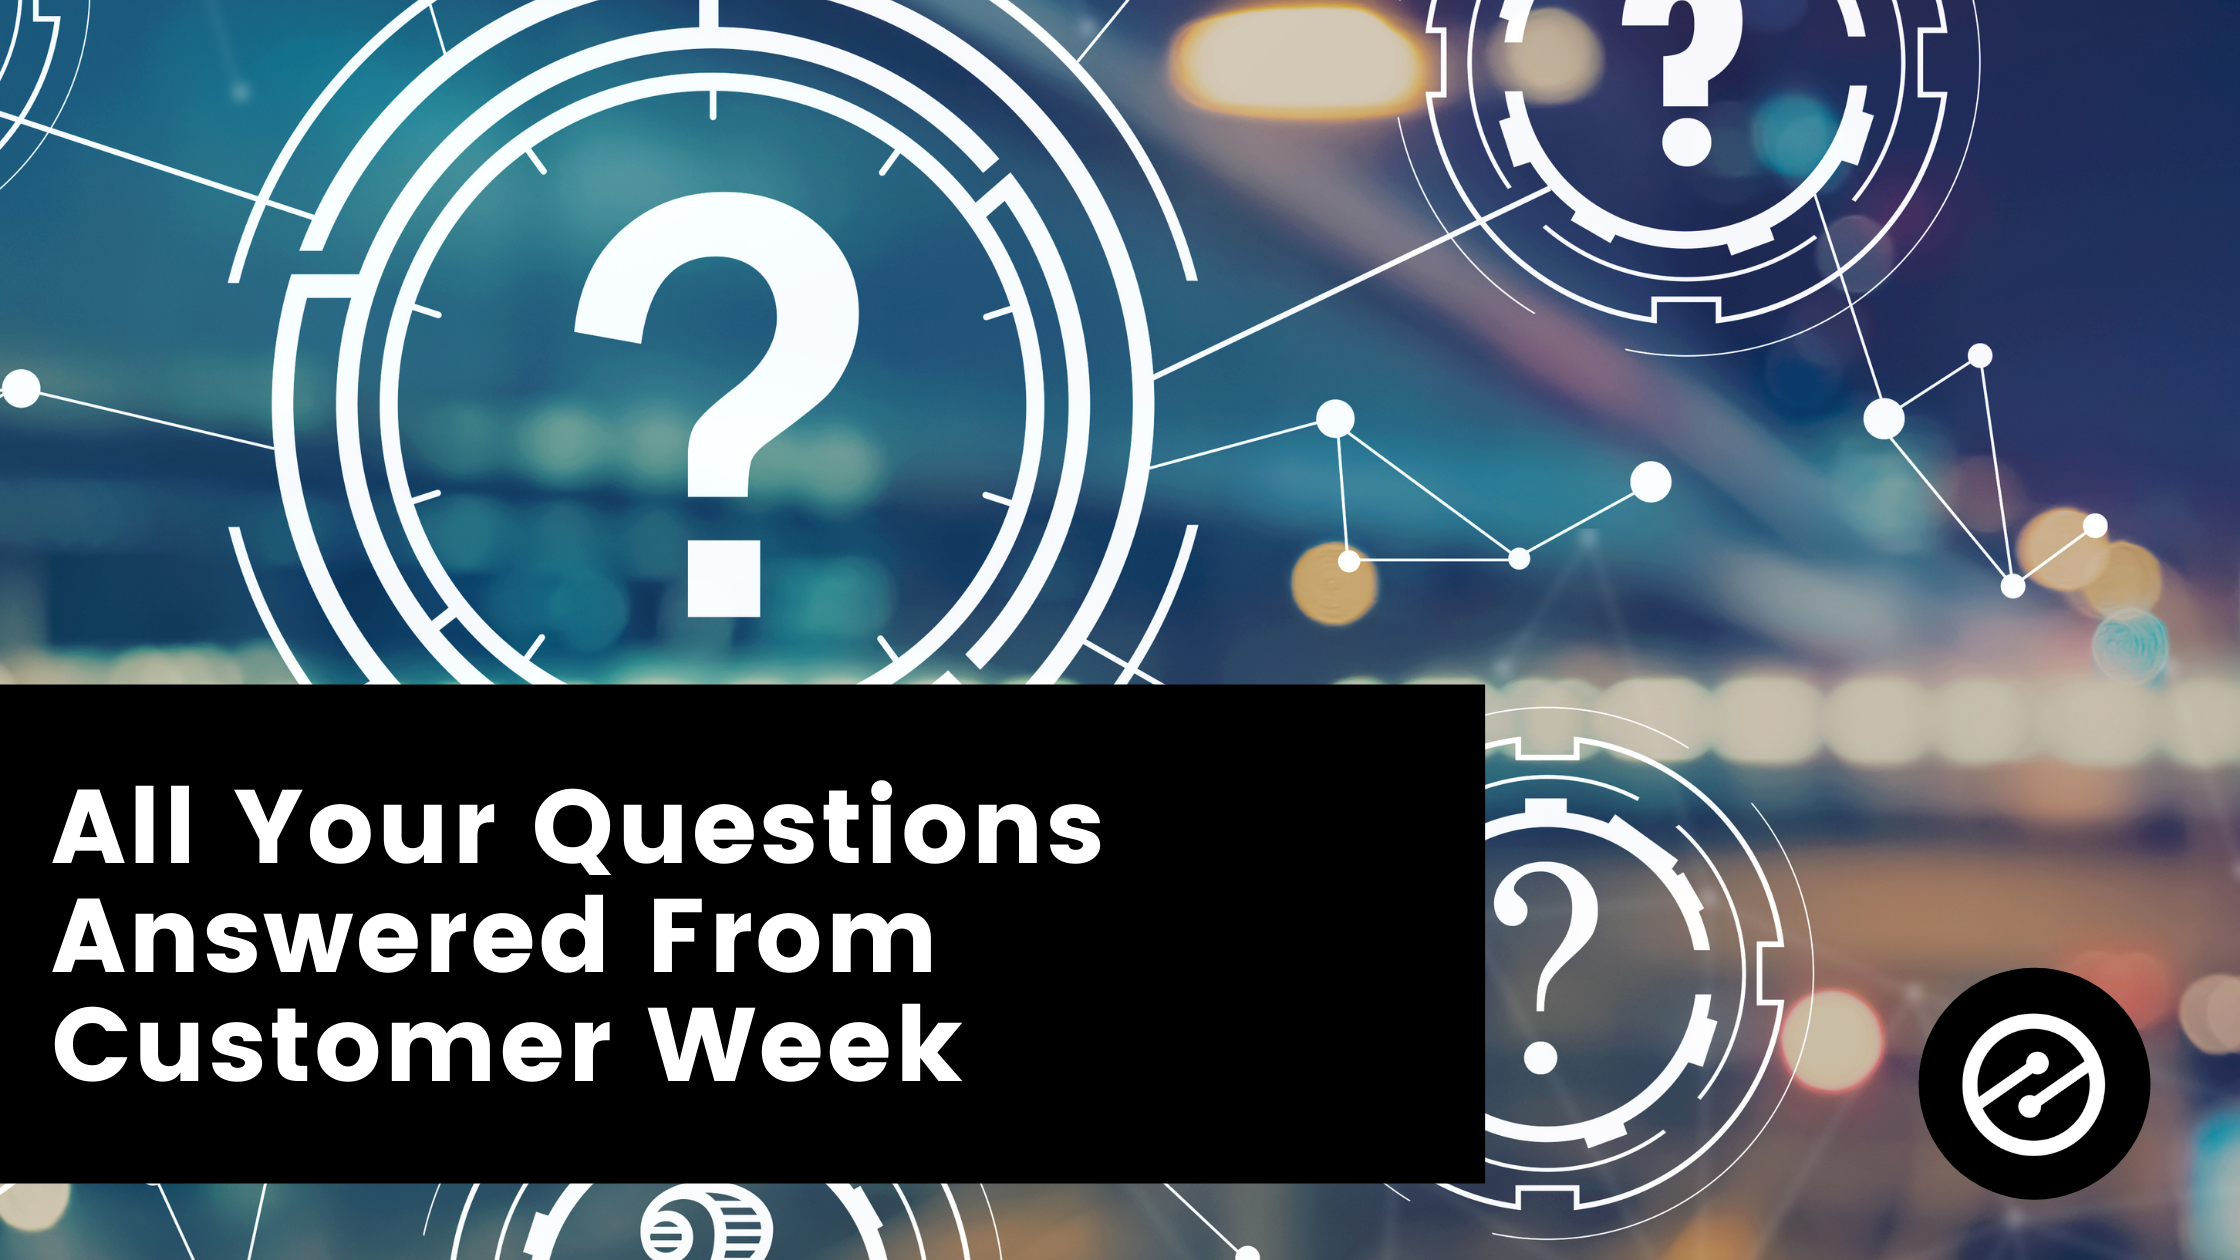 All Your Questions Answered From Customer Week